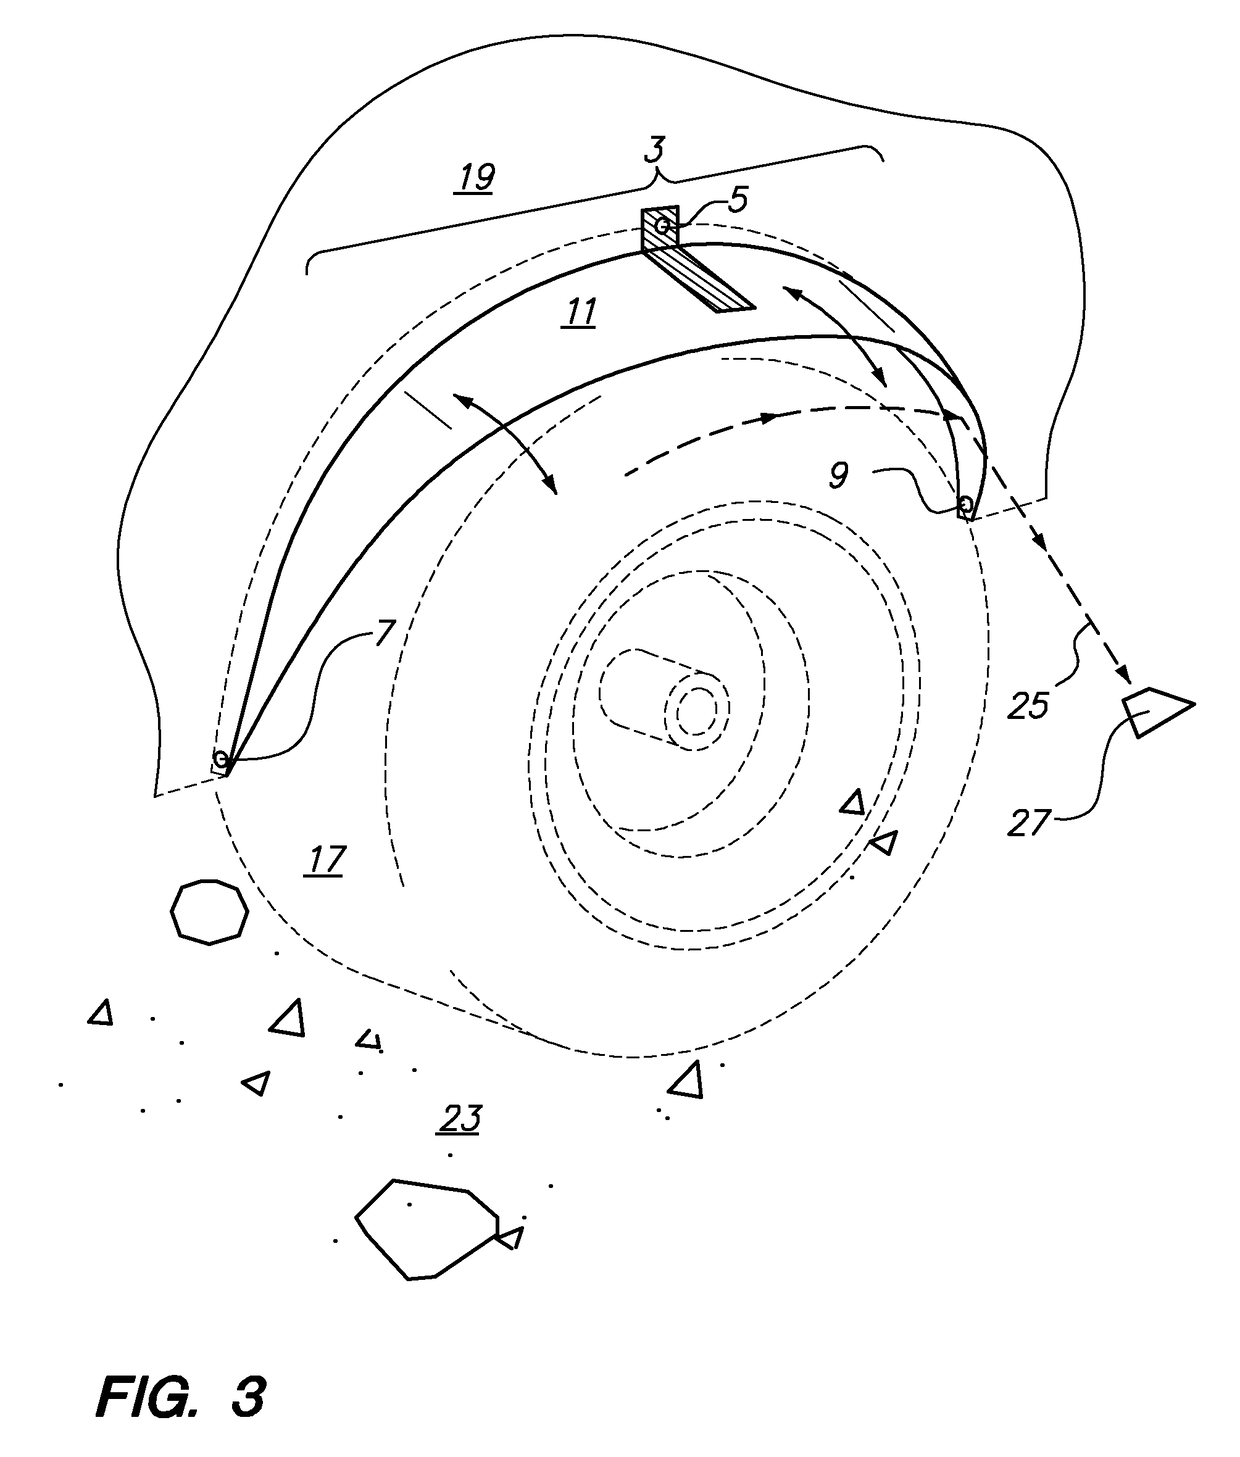 Retractable tangential debris deflector for vehicle occupant safety